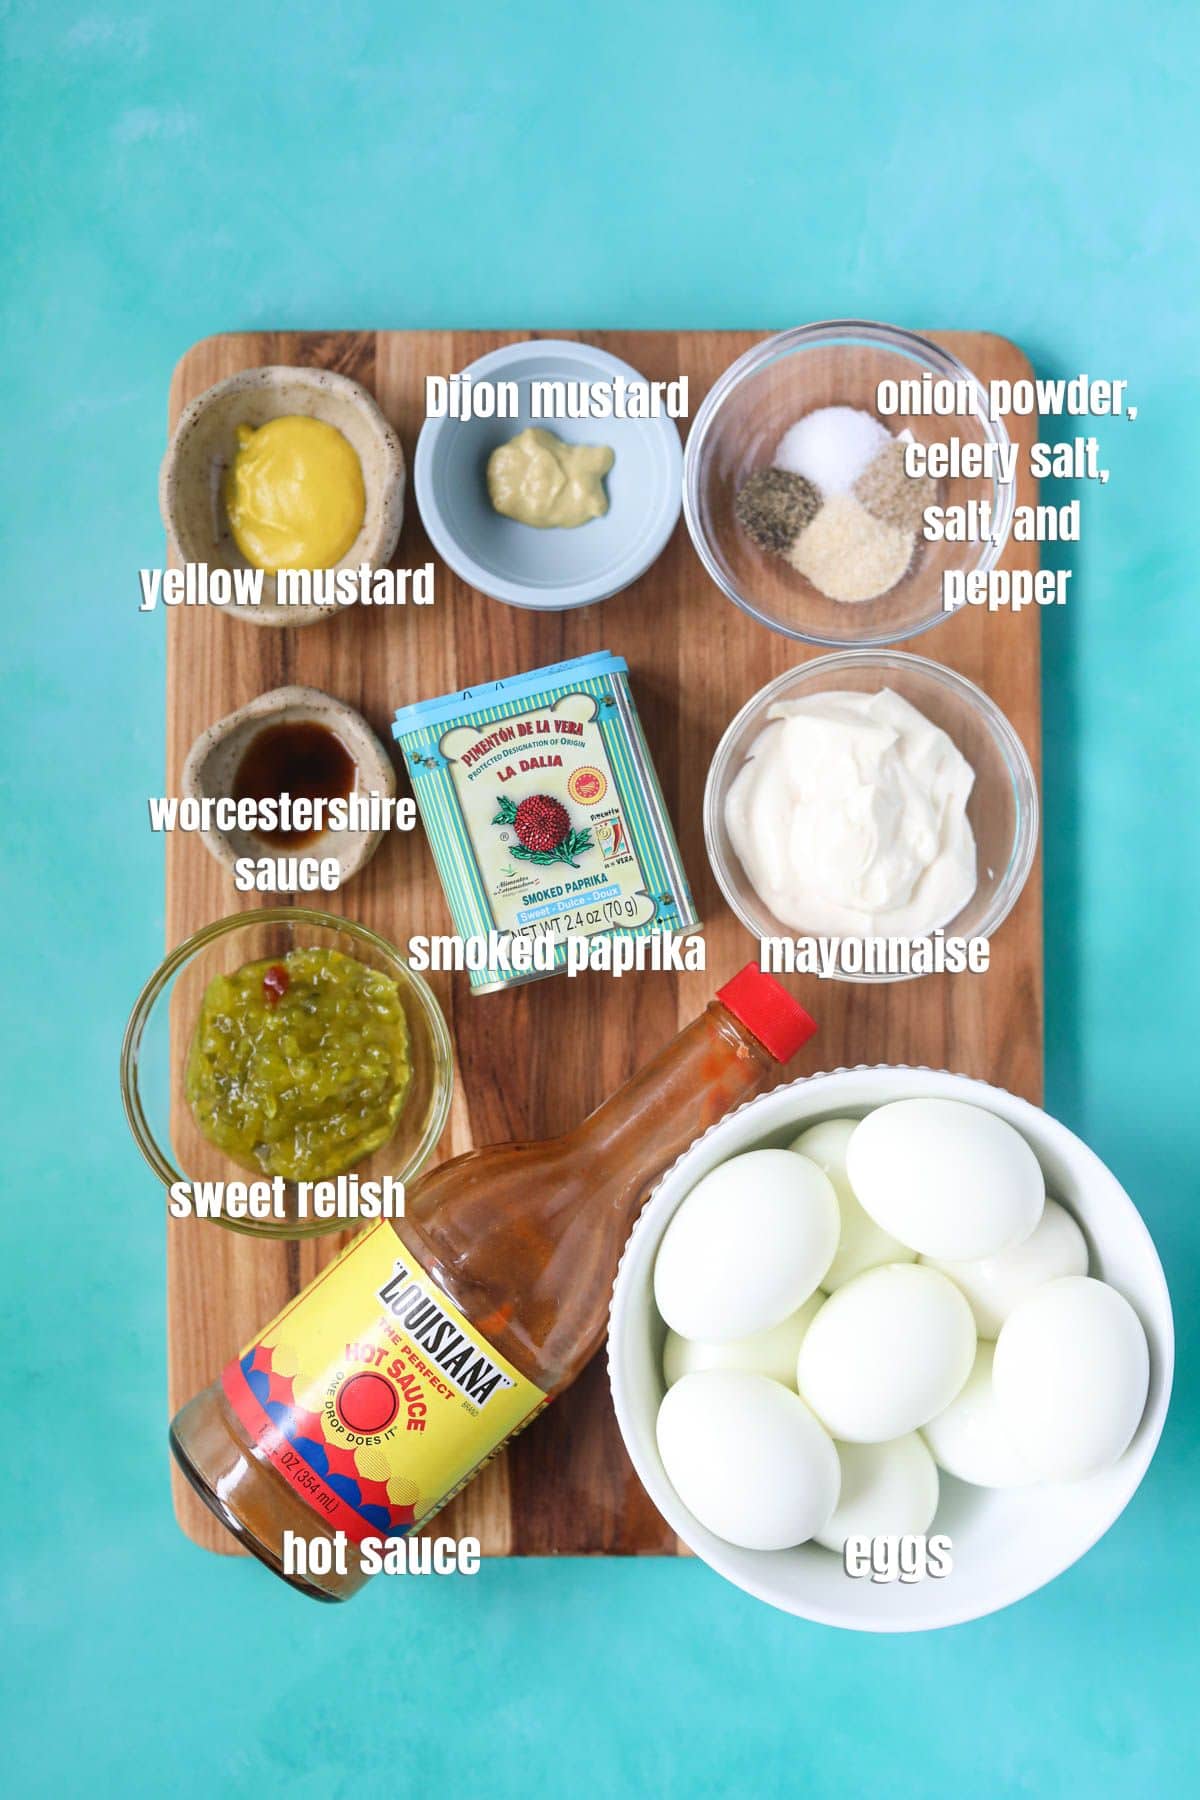 Ingredients for making southern deviled eggs arranged on a wooden cutting board.